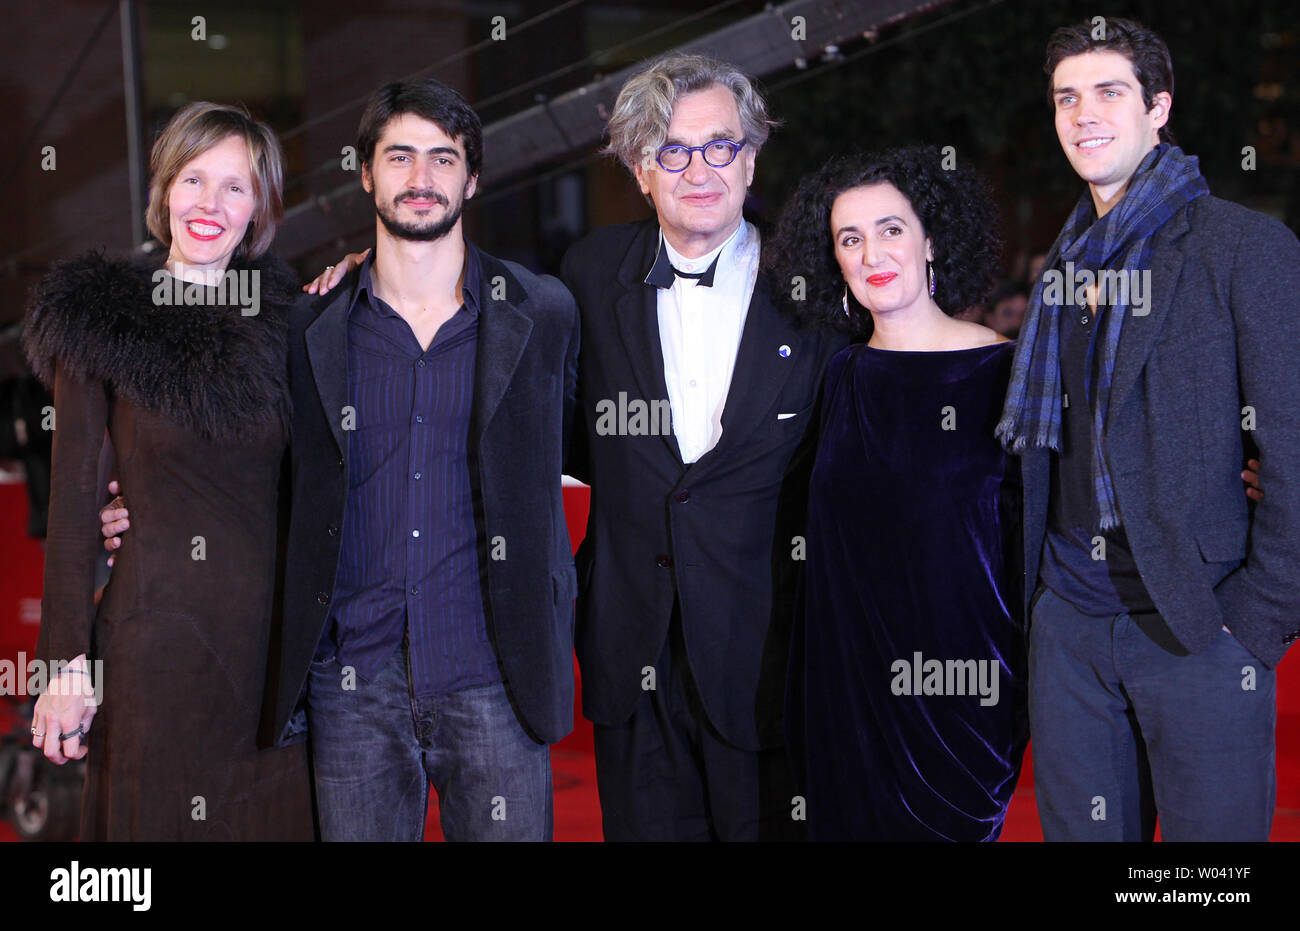 (From L to R) Donata Wenders, Damiano Ottavio Bigi, Wim Wenders, Cristiana Morganti and Roberto Bolle arrive on the red carpet before a screening of the film 'Pina' during the 6th Rome International Film Festival in Rome on October 31, 2011.   UPI/David Silpa Stock Photo